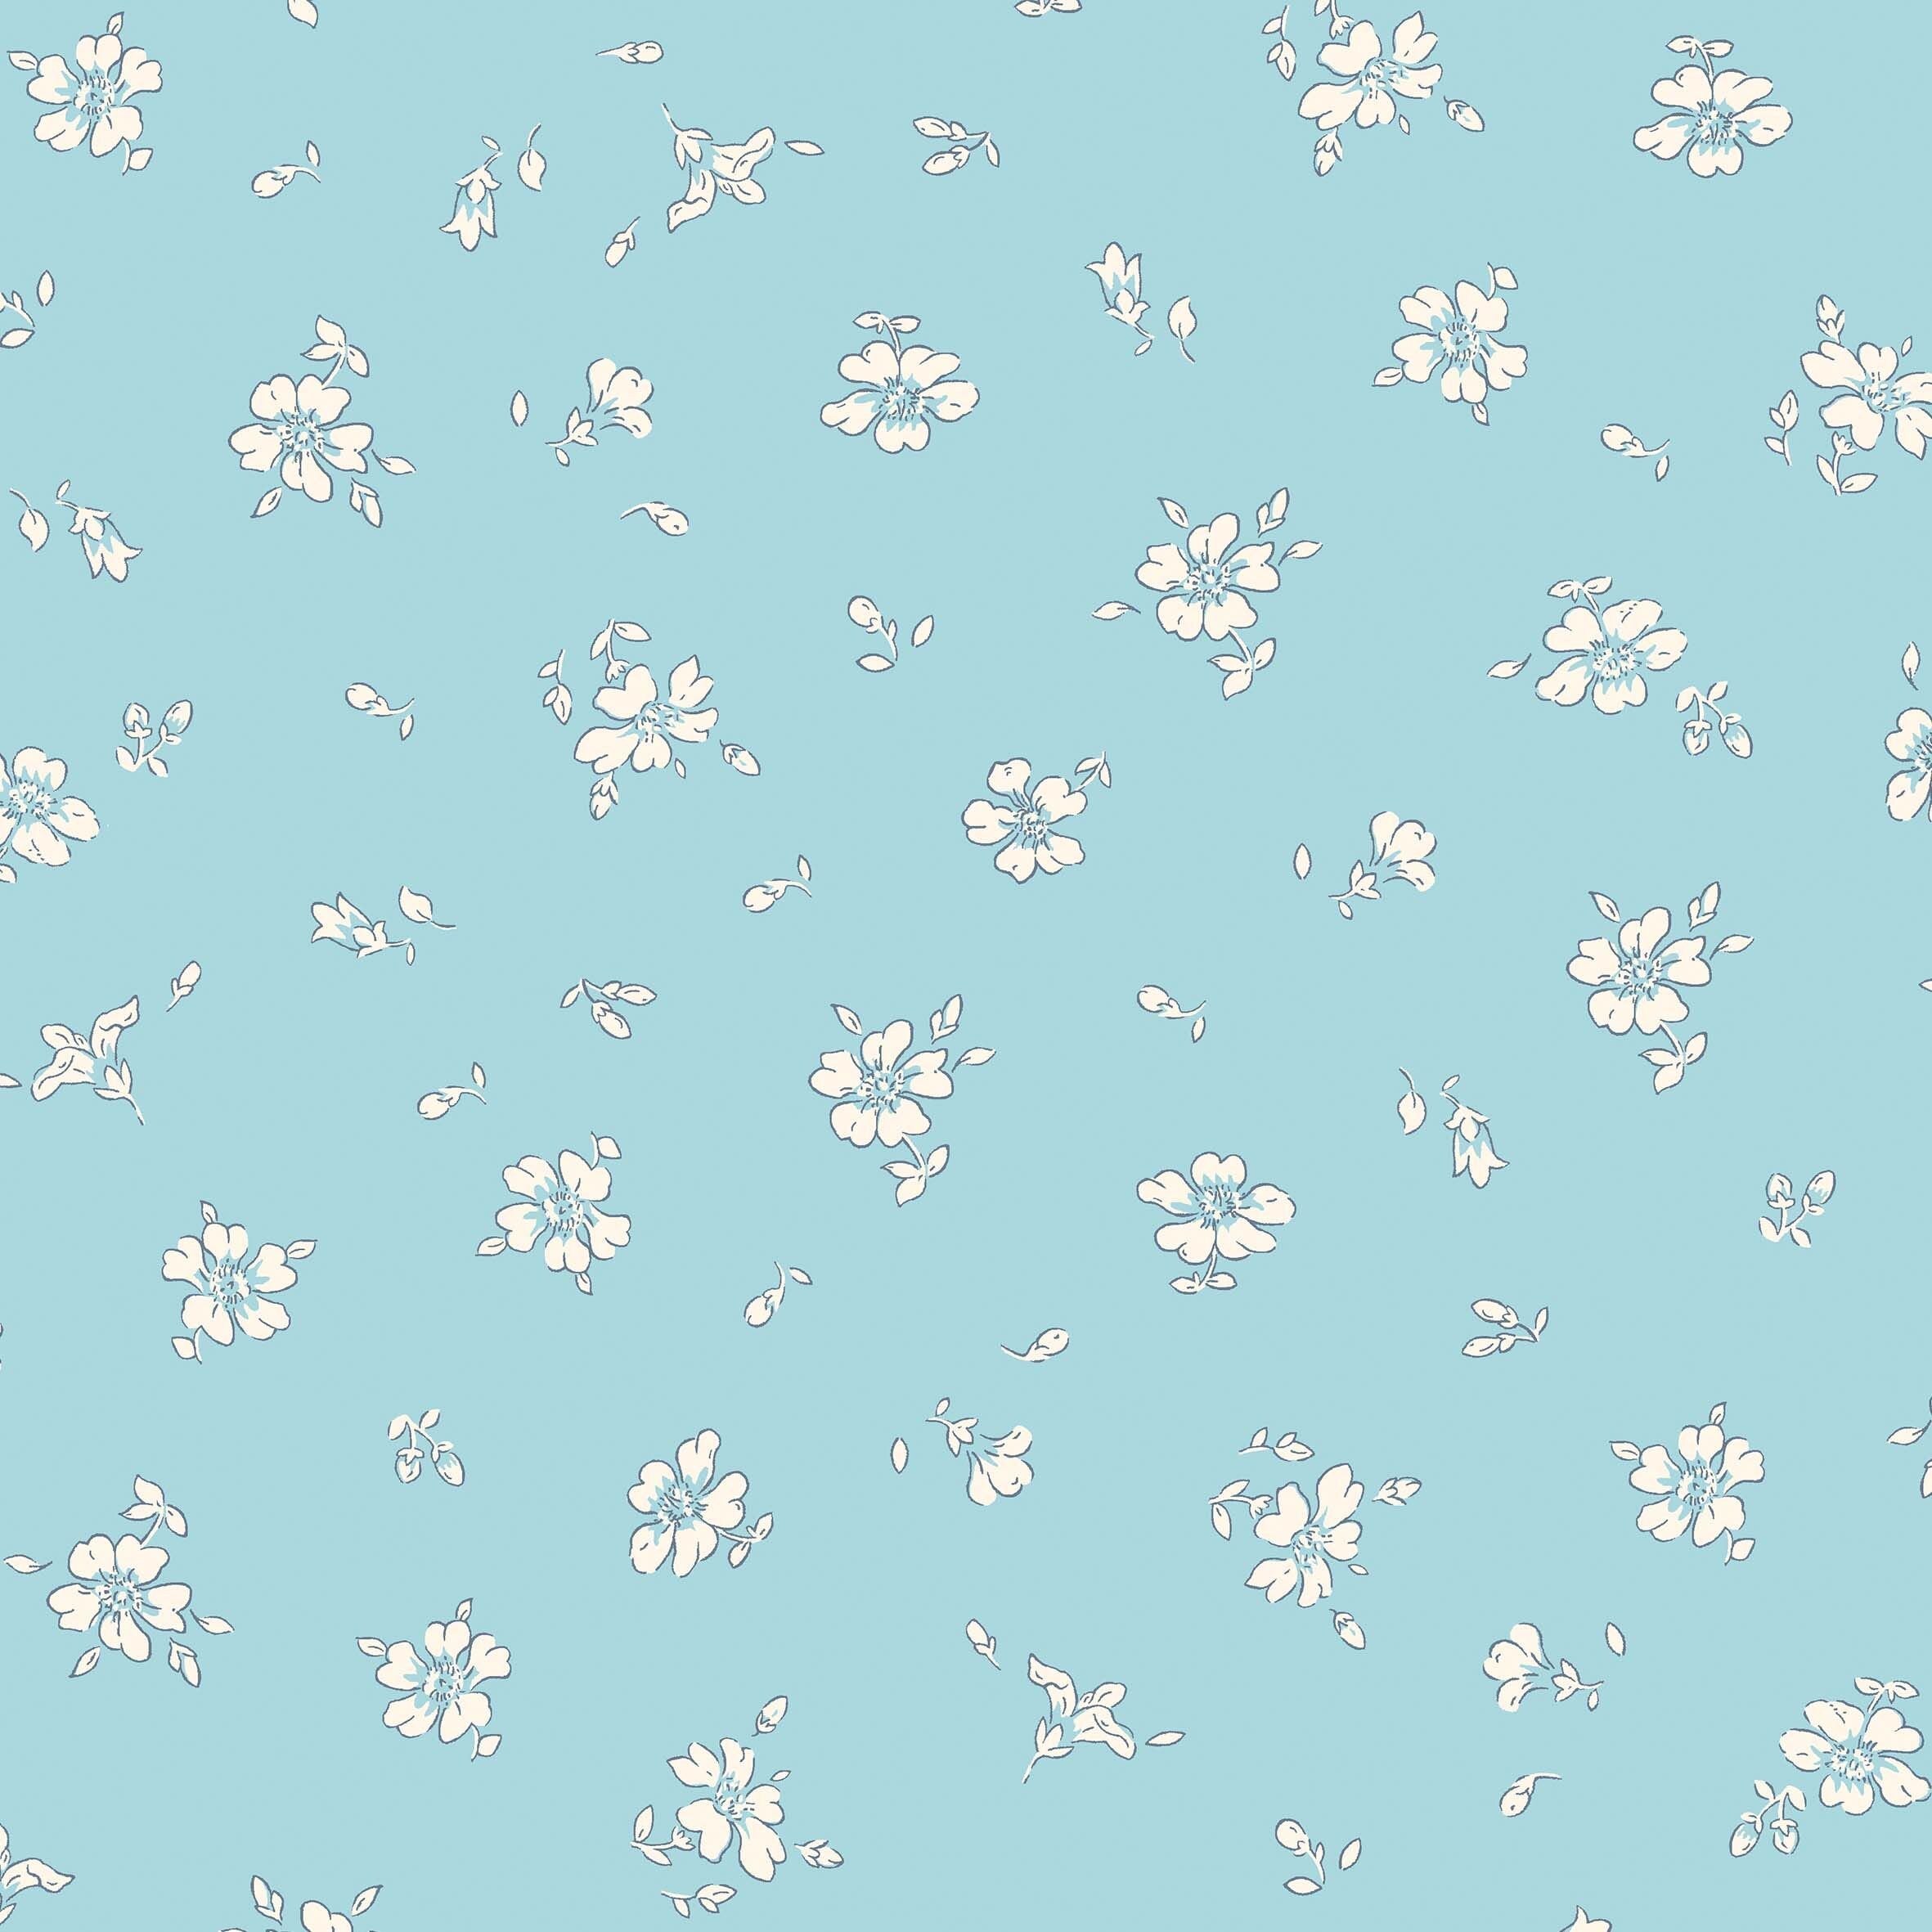 Delicate little white flowers on a blue cotton fabirc - 'Field Rose' Flower Show Midsummer cotton fabric by Liberty